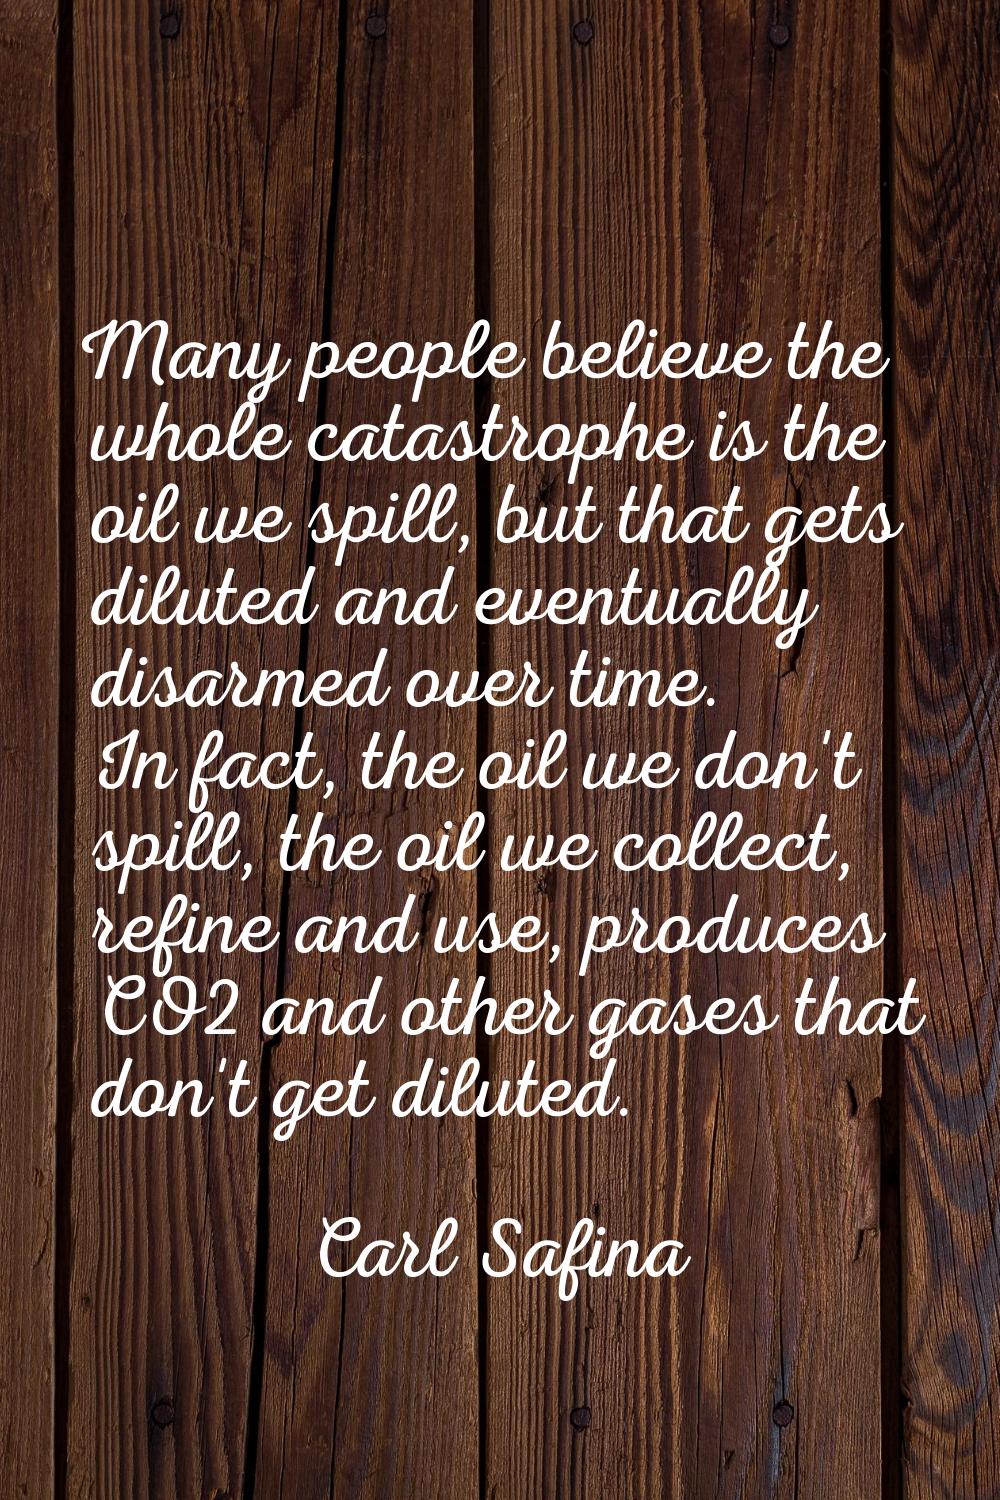 Many people believe the whole catastrophe is the oil we spill, but that gets diluted and eventually